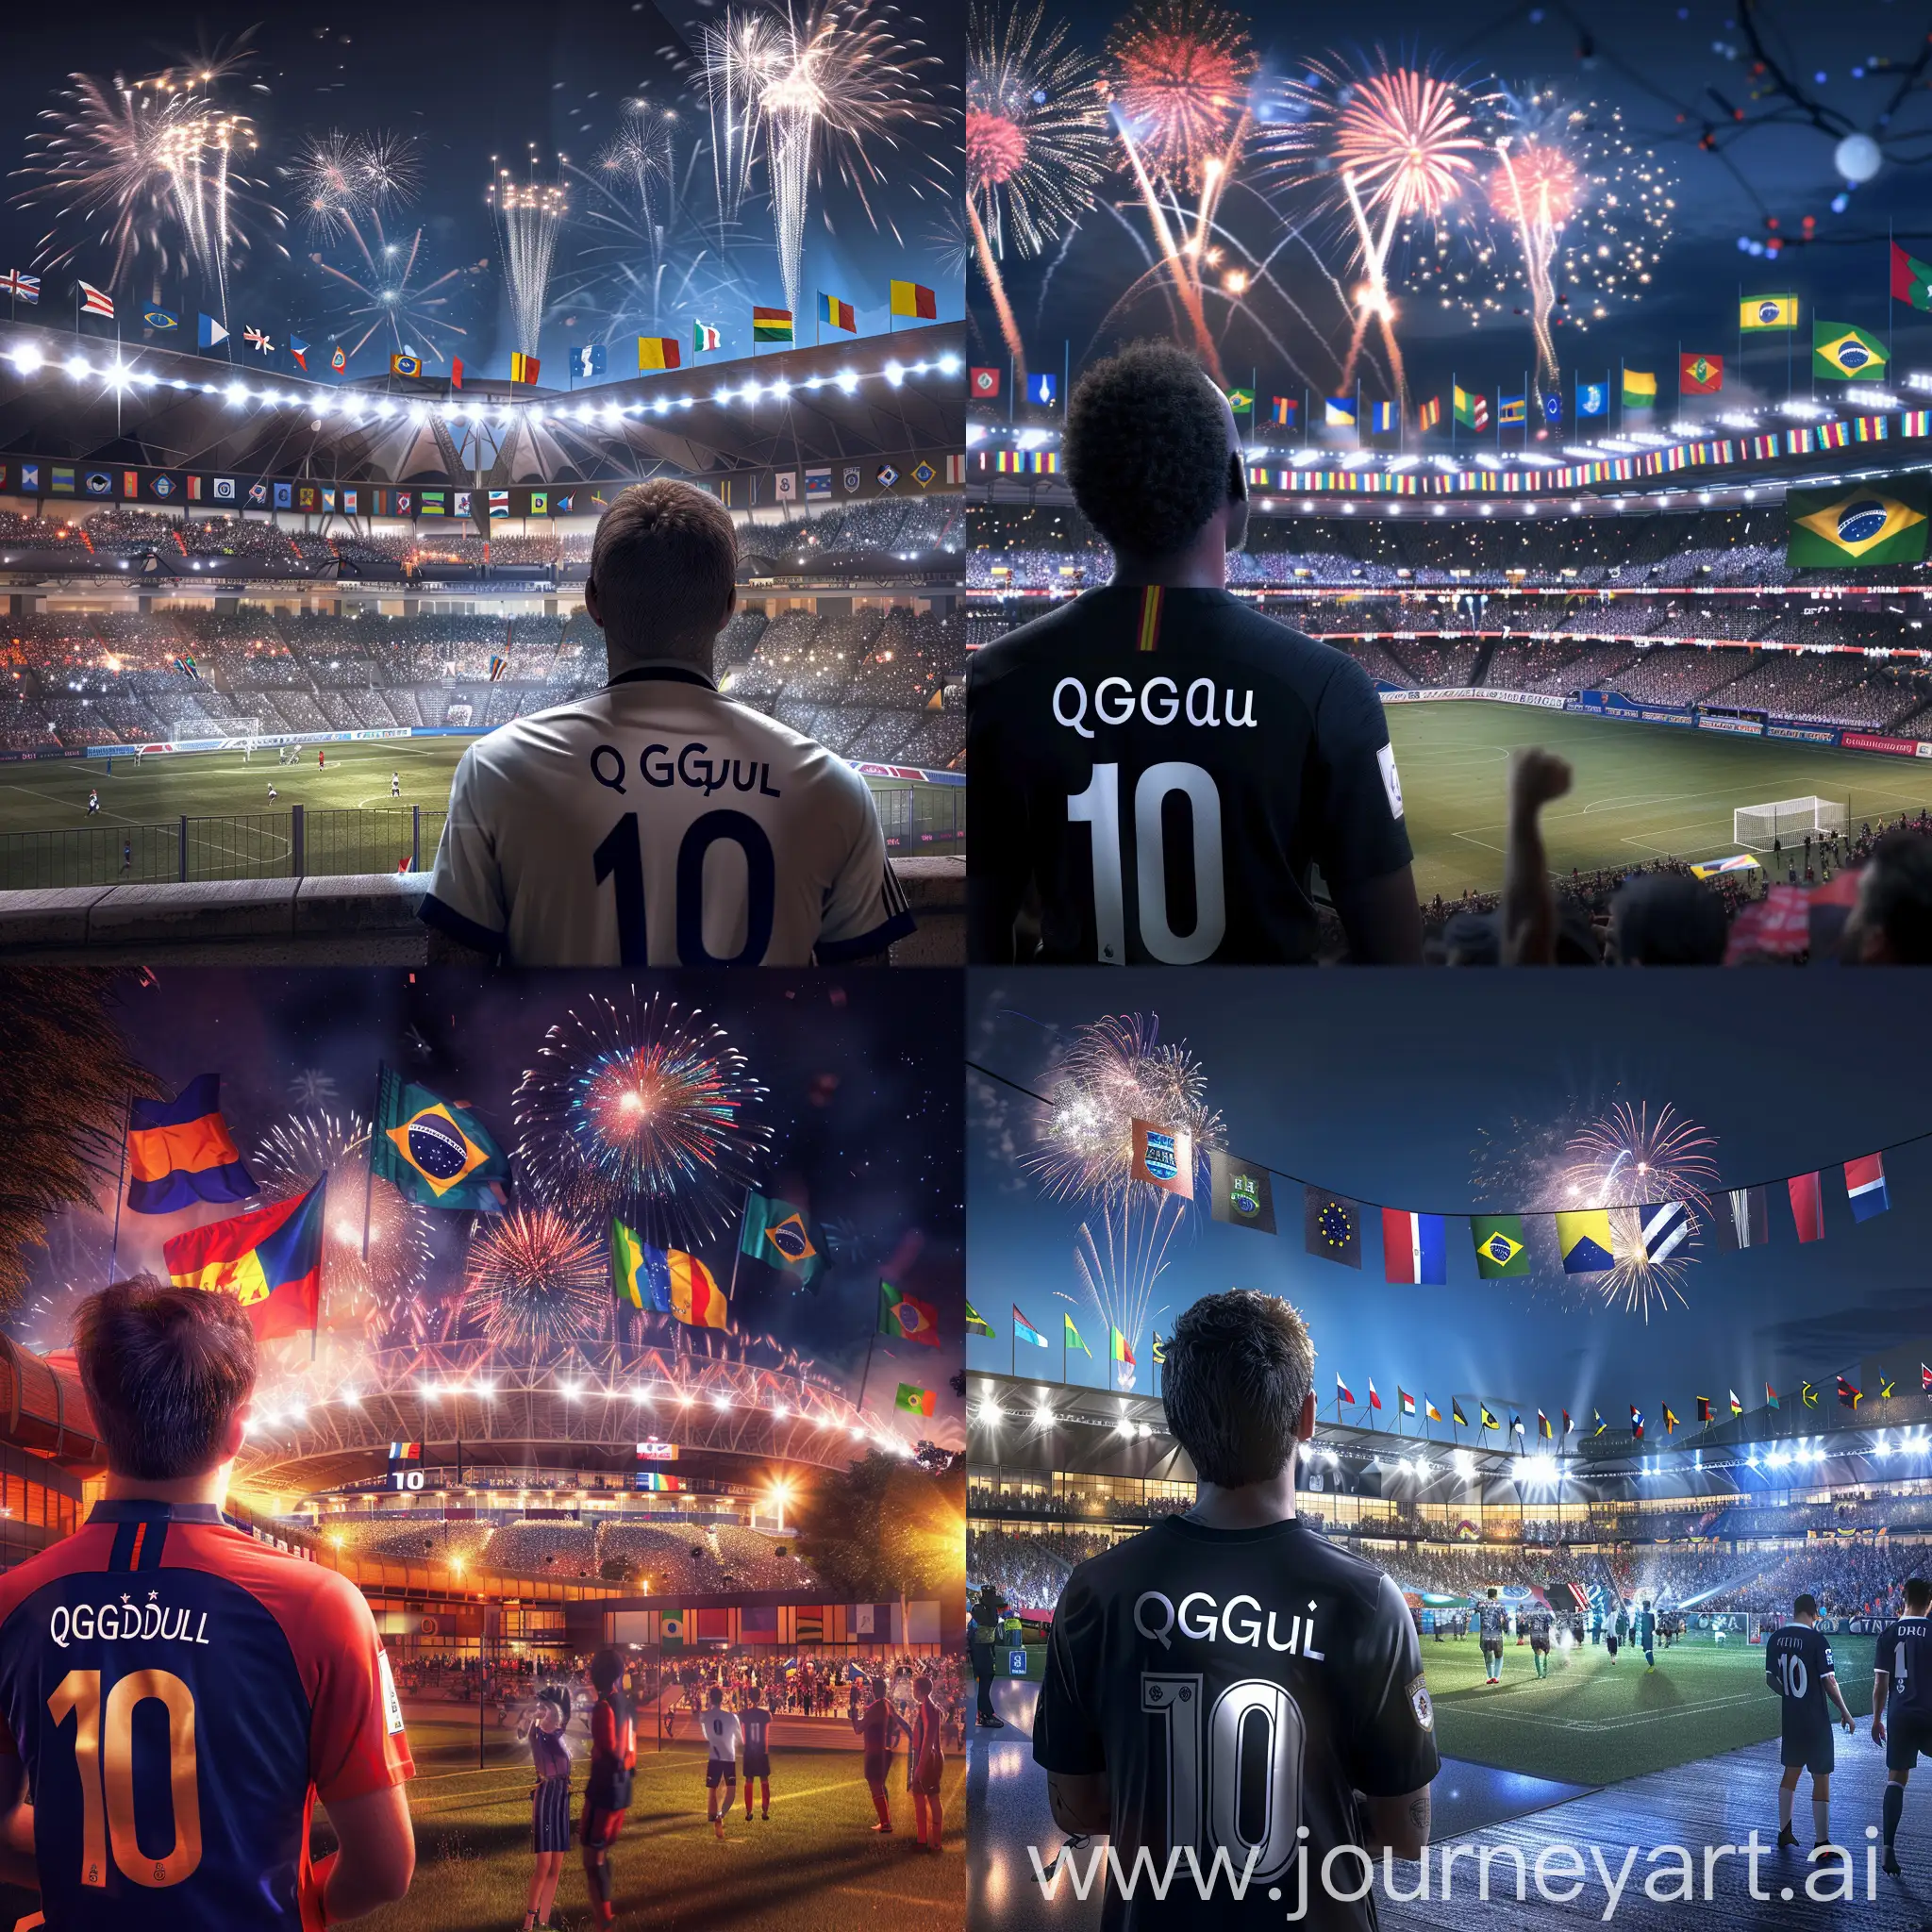 4K image of a passionate football fan in a number 10 jersey named 'QGduFootball', gazing at a distant lively stadium. Scene transitions to night with fireworks above the stadium. Stadium's stands display flags of France, Brazil, Argentina, Morocco, Netherlands, Portugal, Croatia, and England, creating a diverse and exciting atmosphere